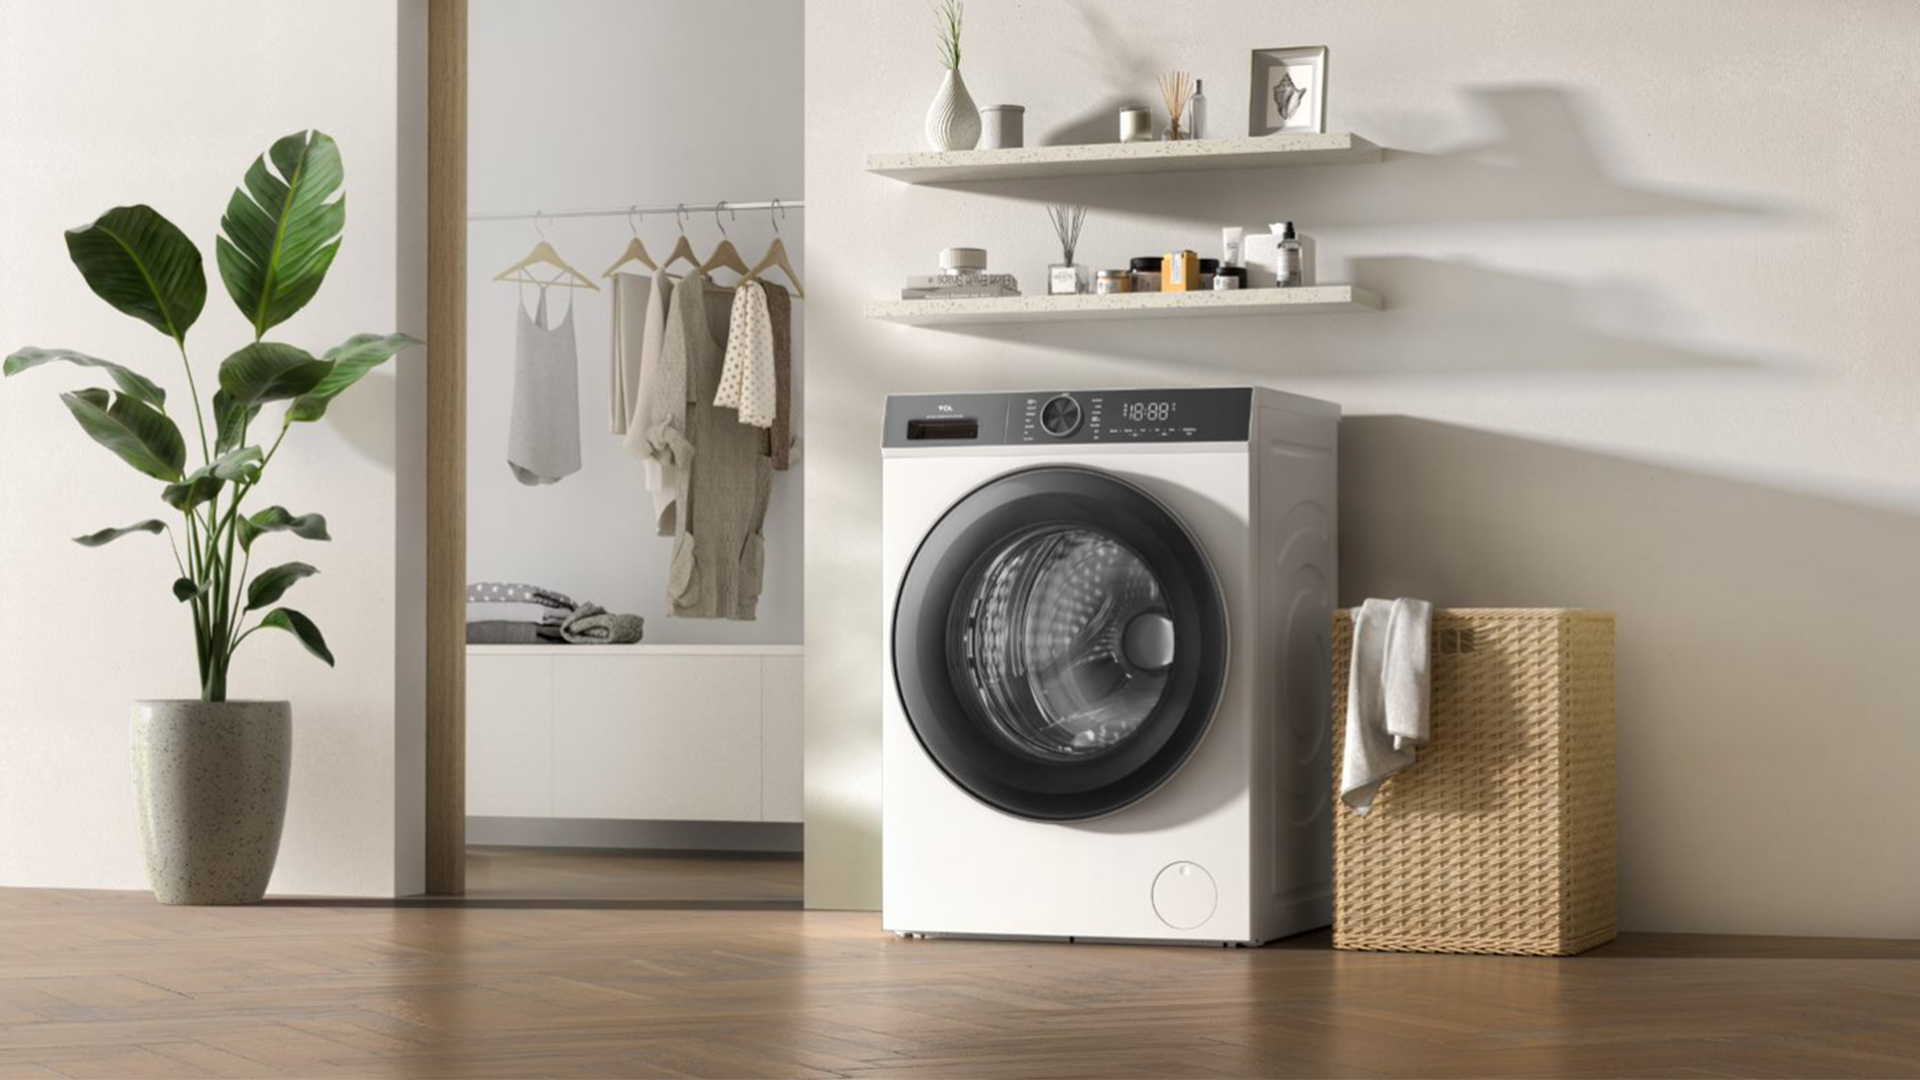 TCL A-Energy Class washing machines